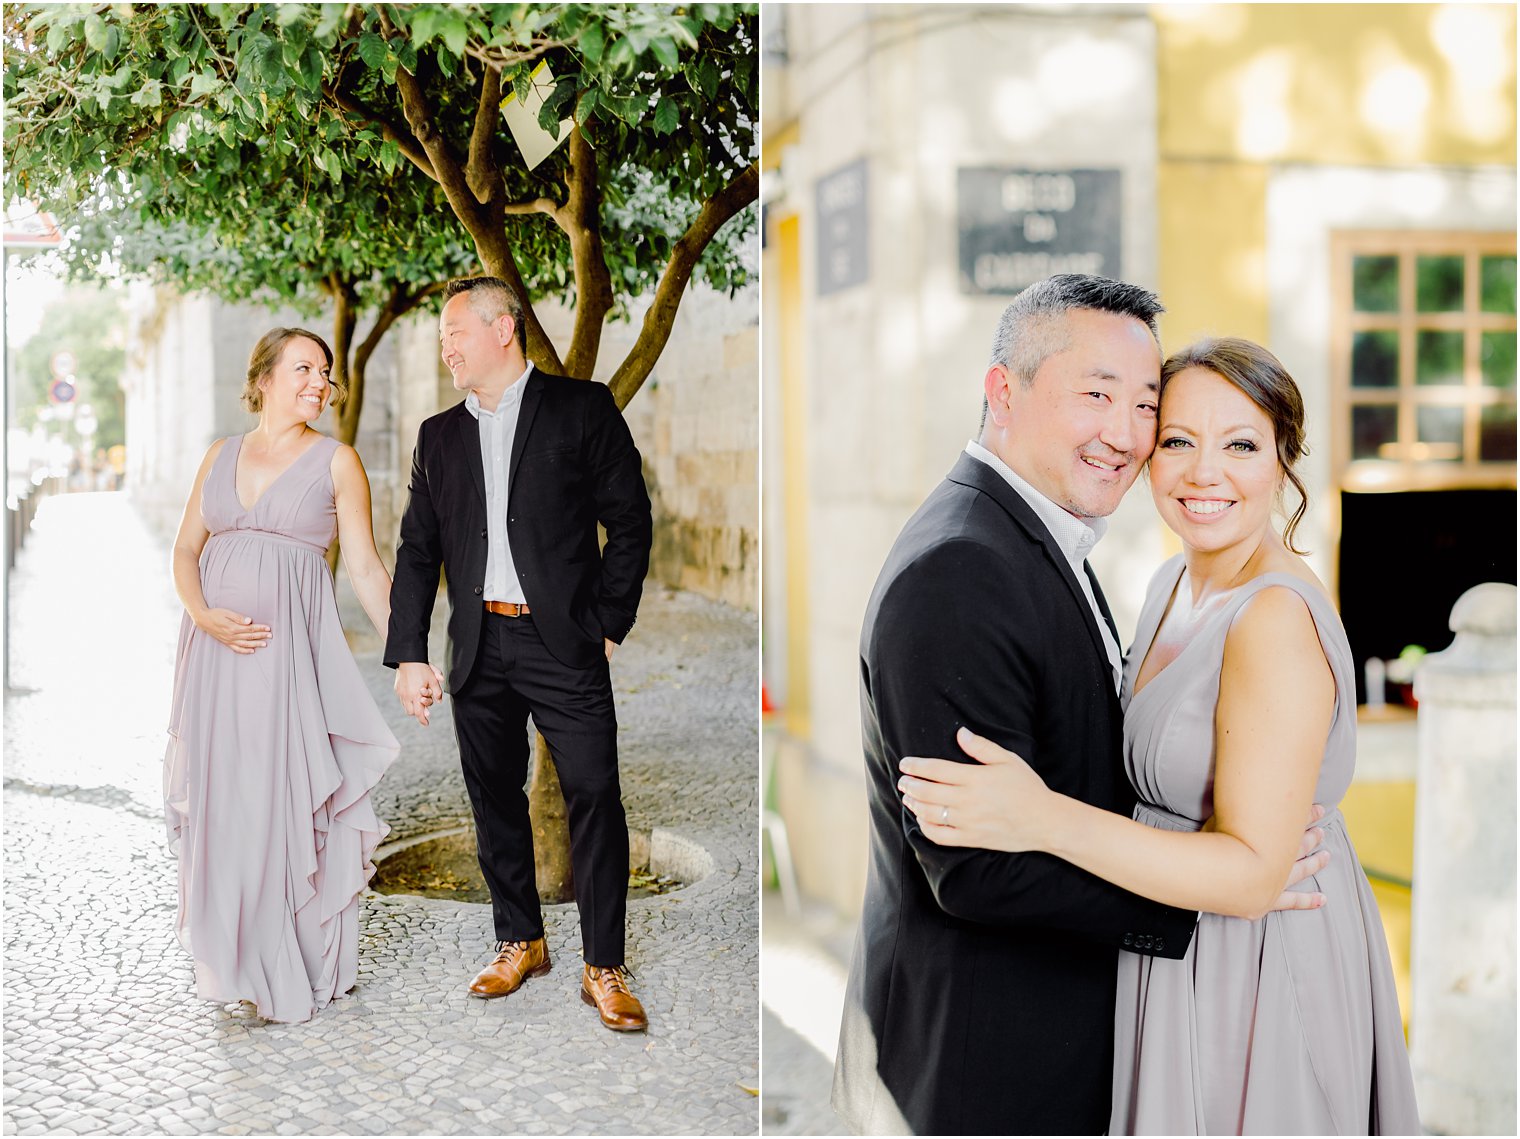 anniversary session in Lisbon, Portugal